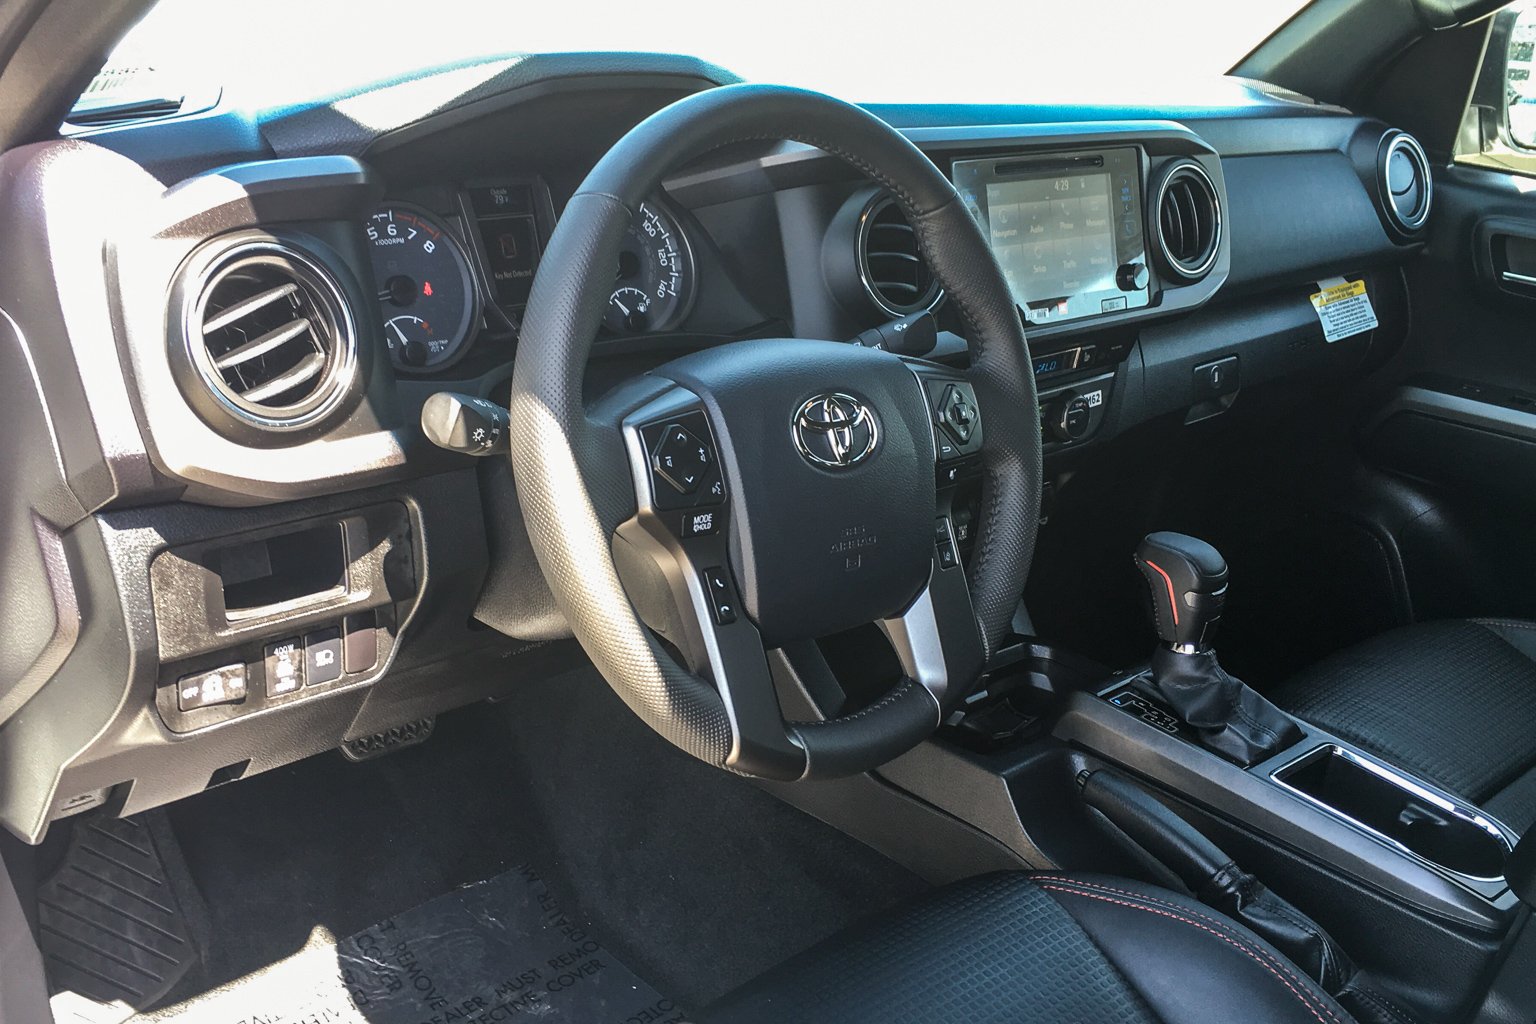 New 2019 Toyota Tacoma 4wd Trd Pro 4wd